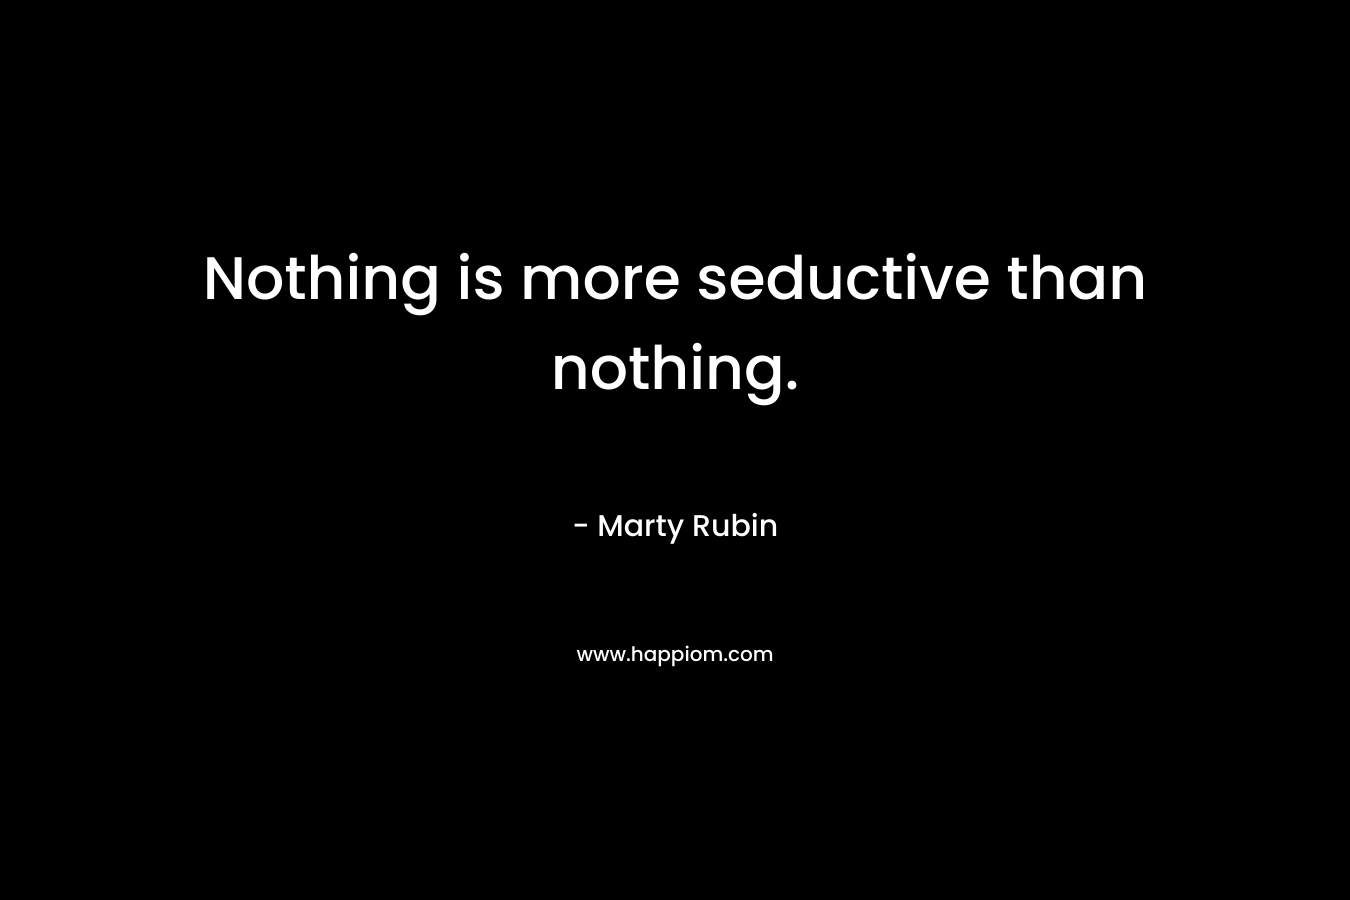 Nothing is more seductive than nothing.